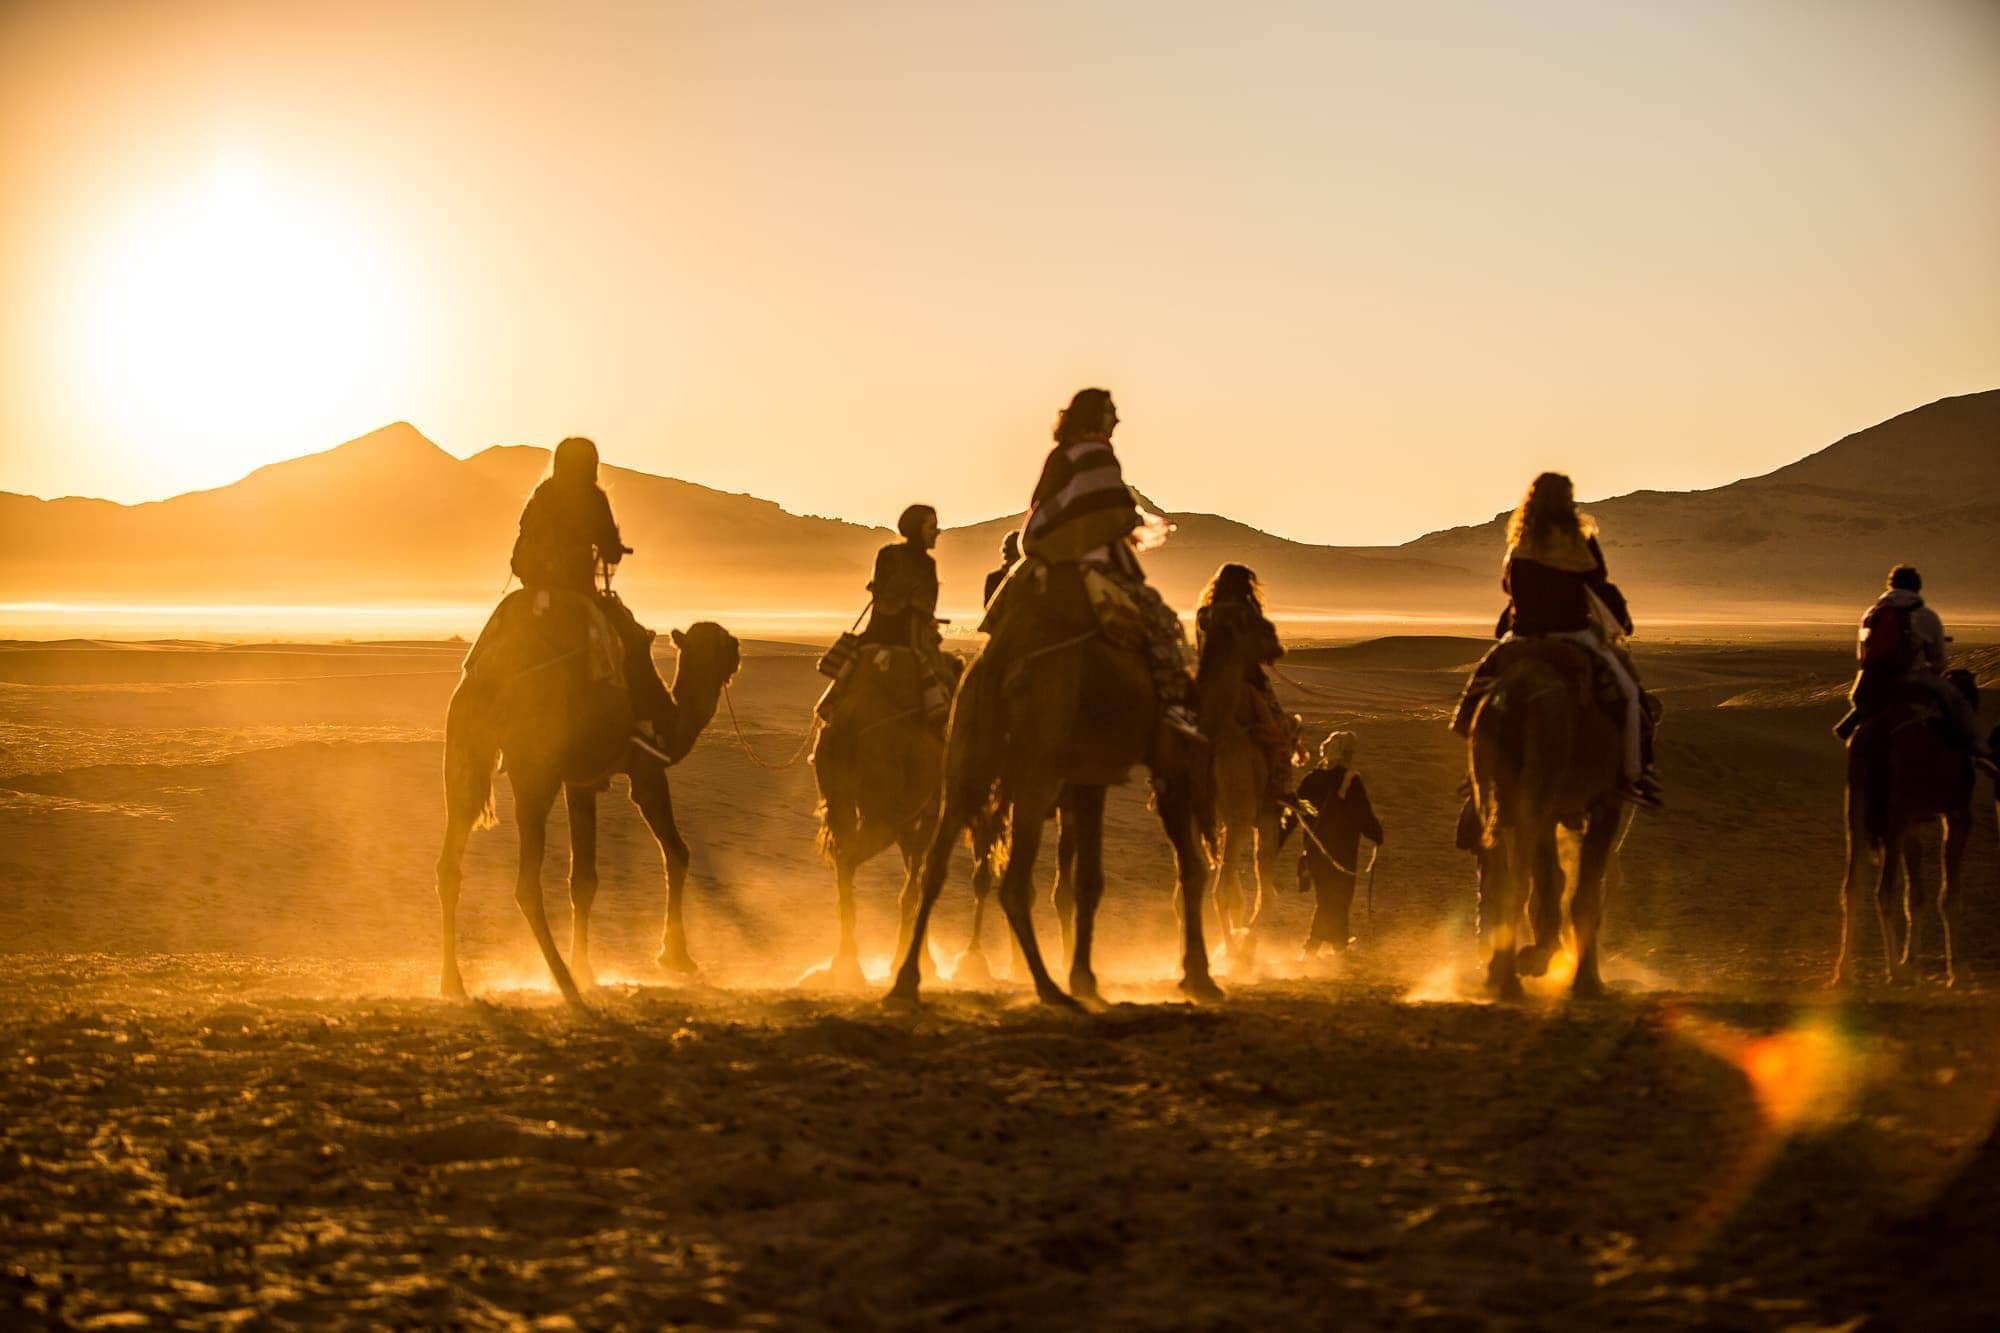 Camels and riders in desert Morocco image